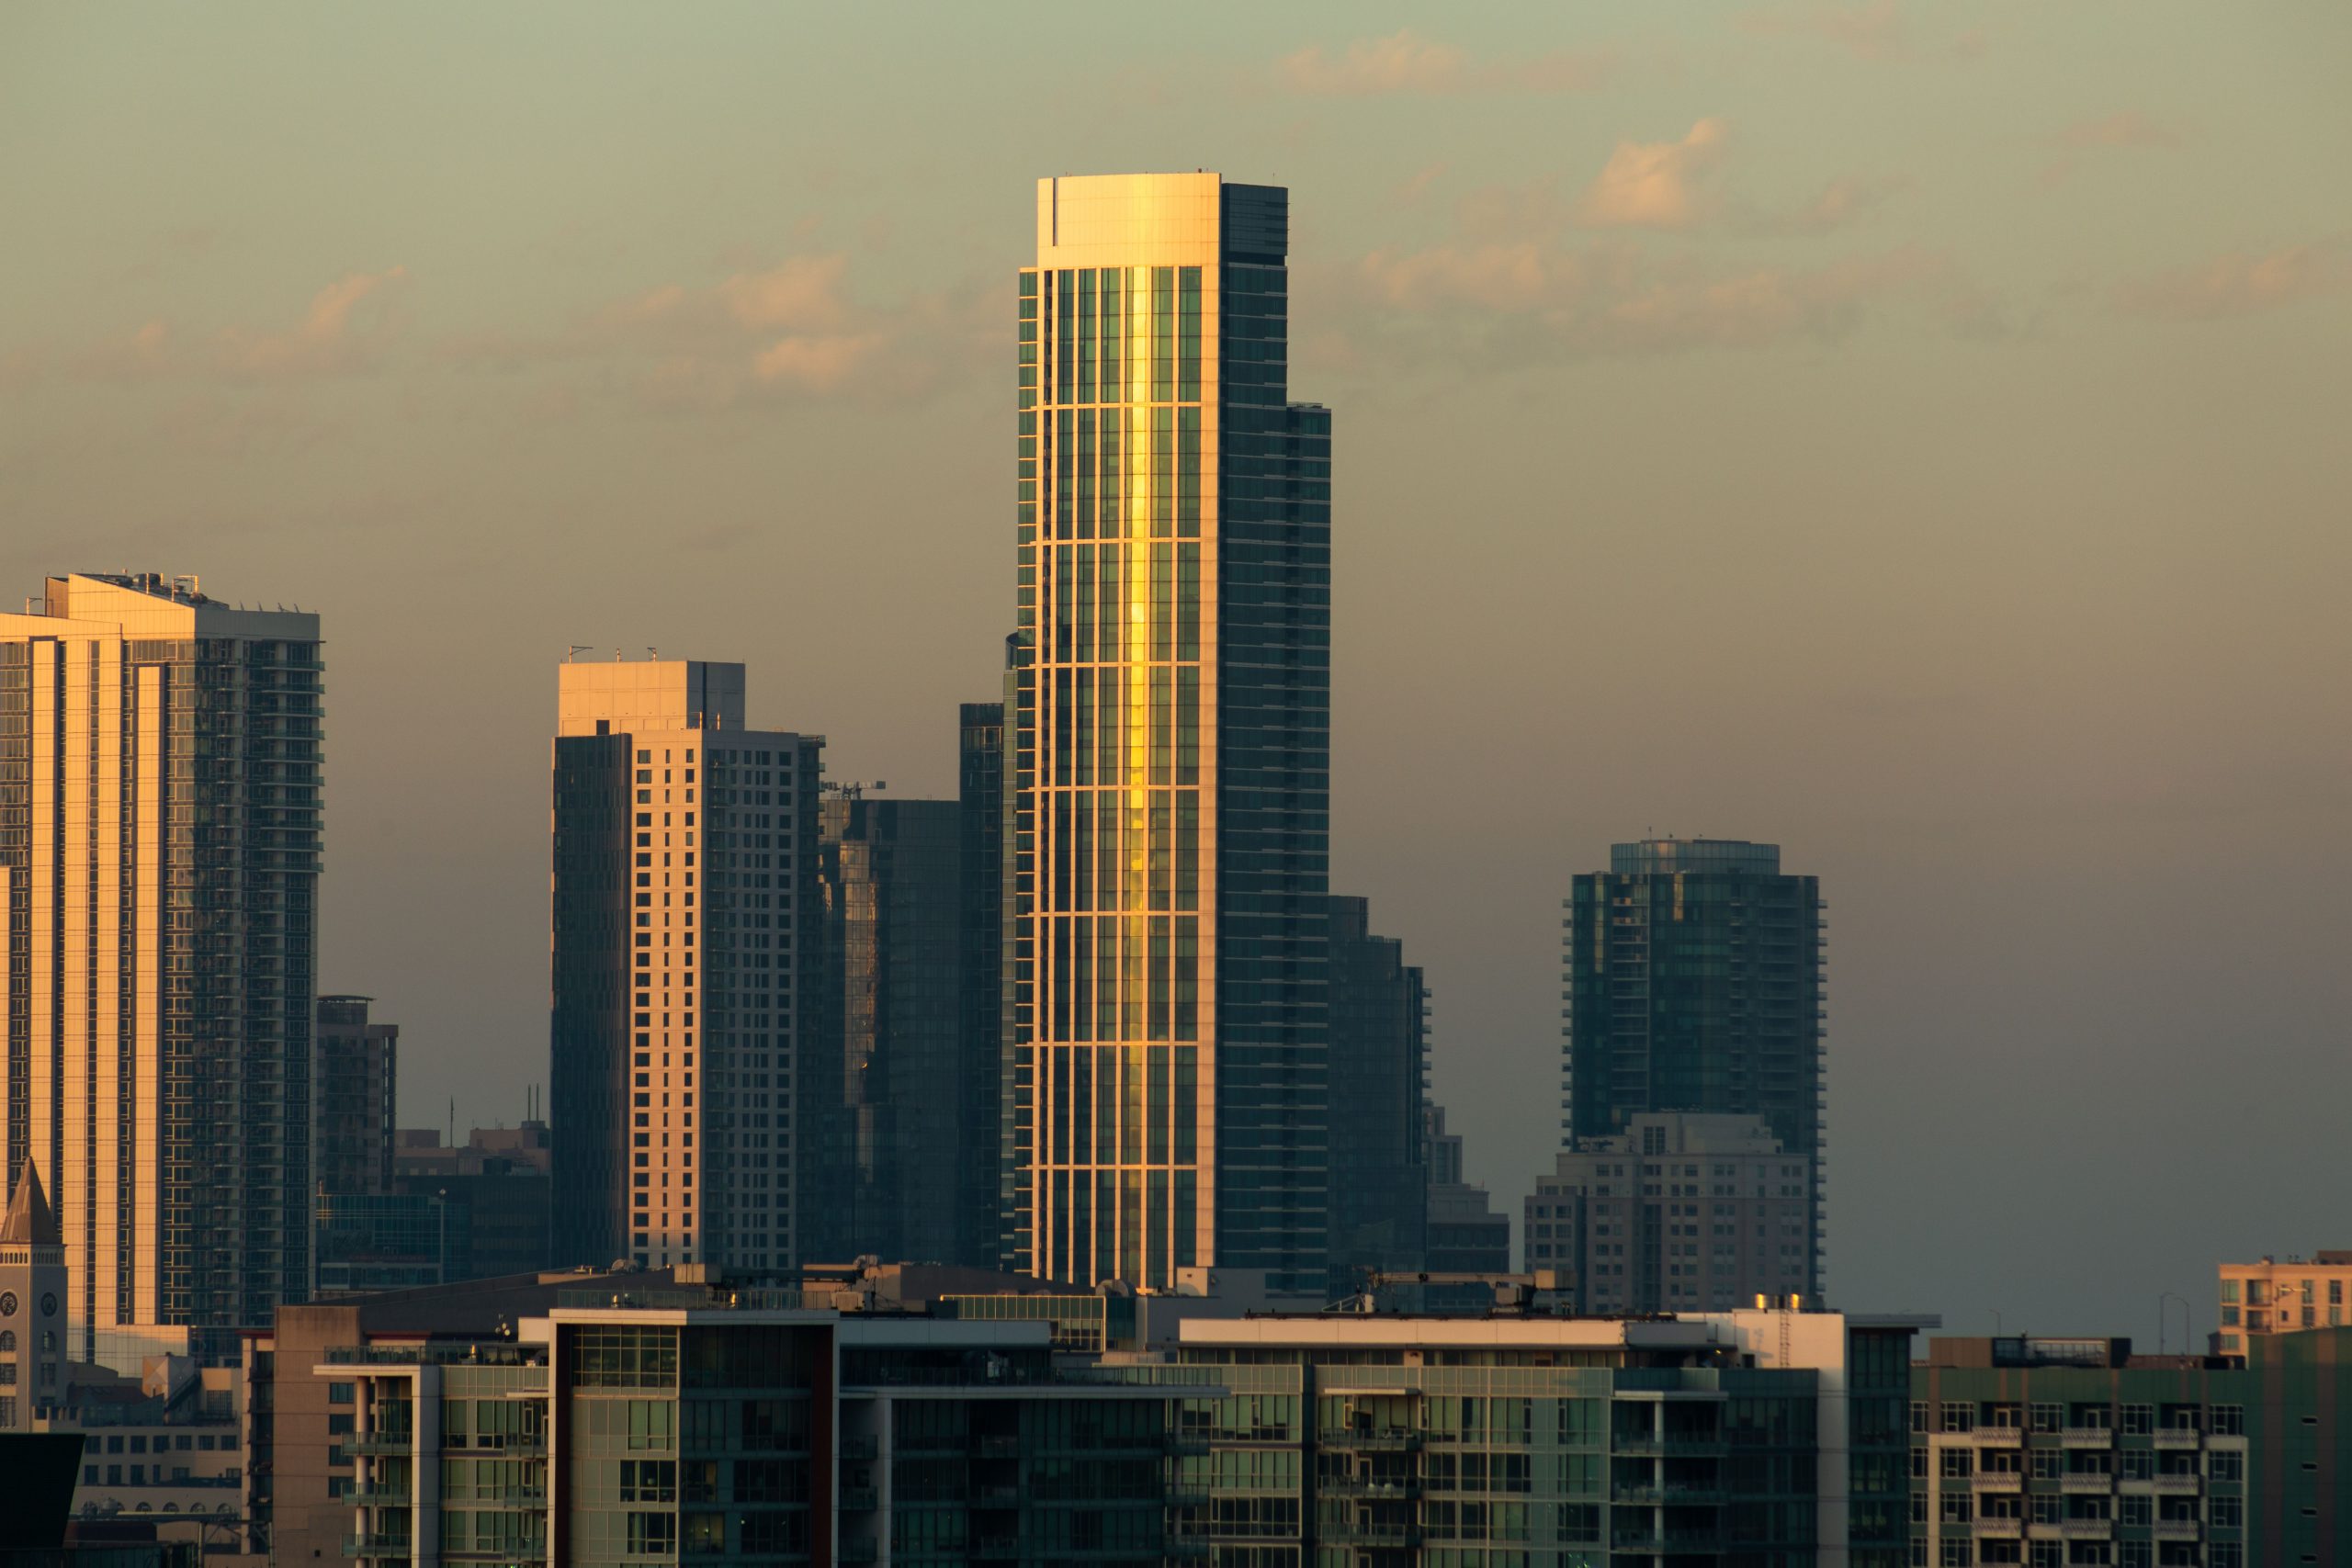 One Rincon Hill at sunset, image by Andrew Campbell Nelson